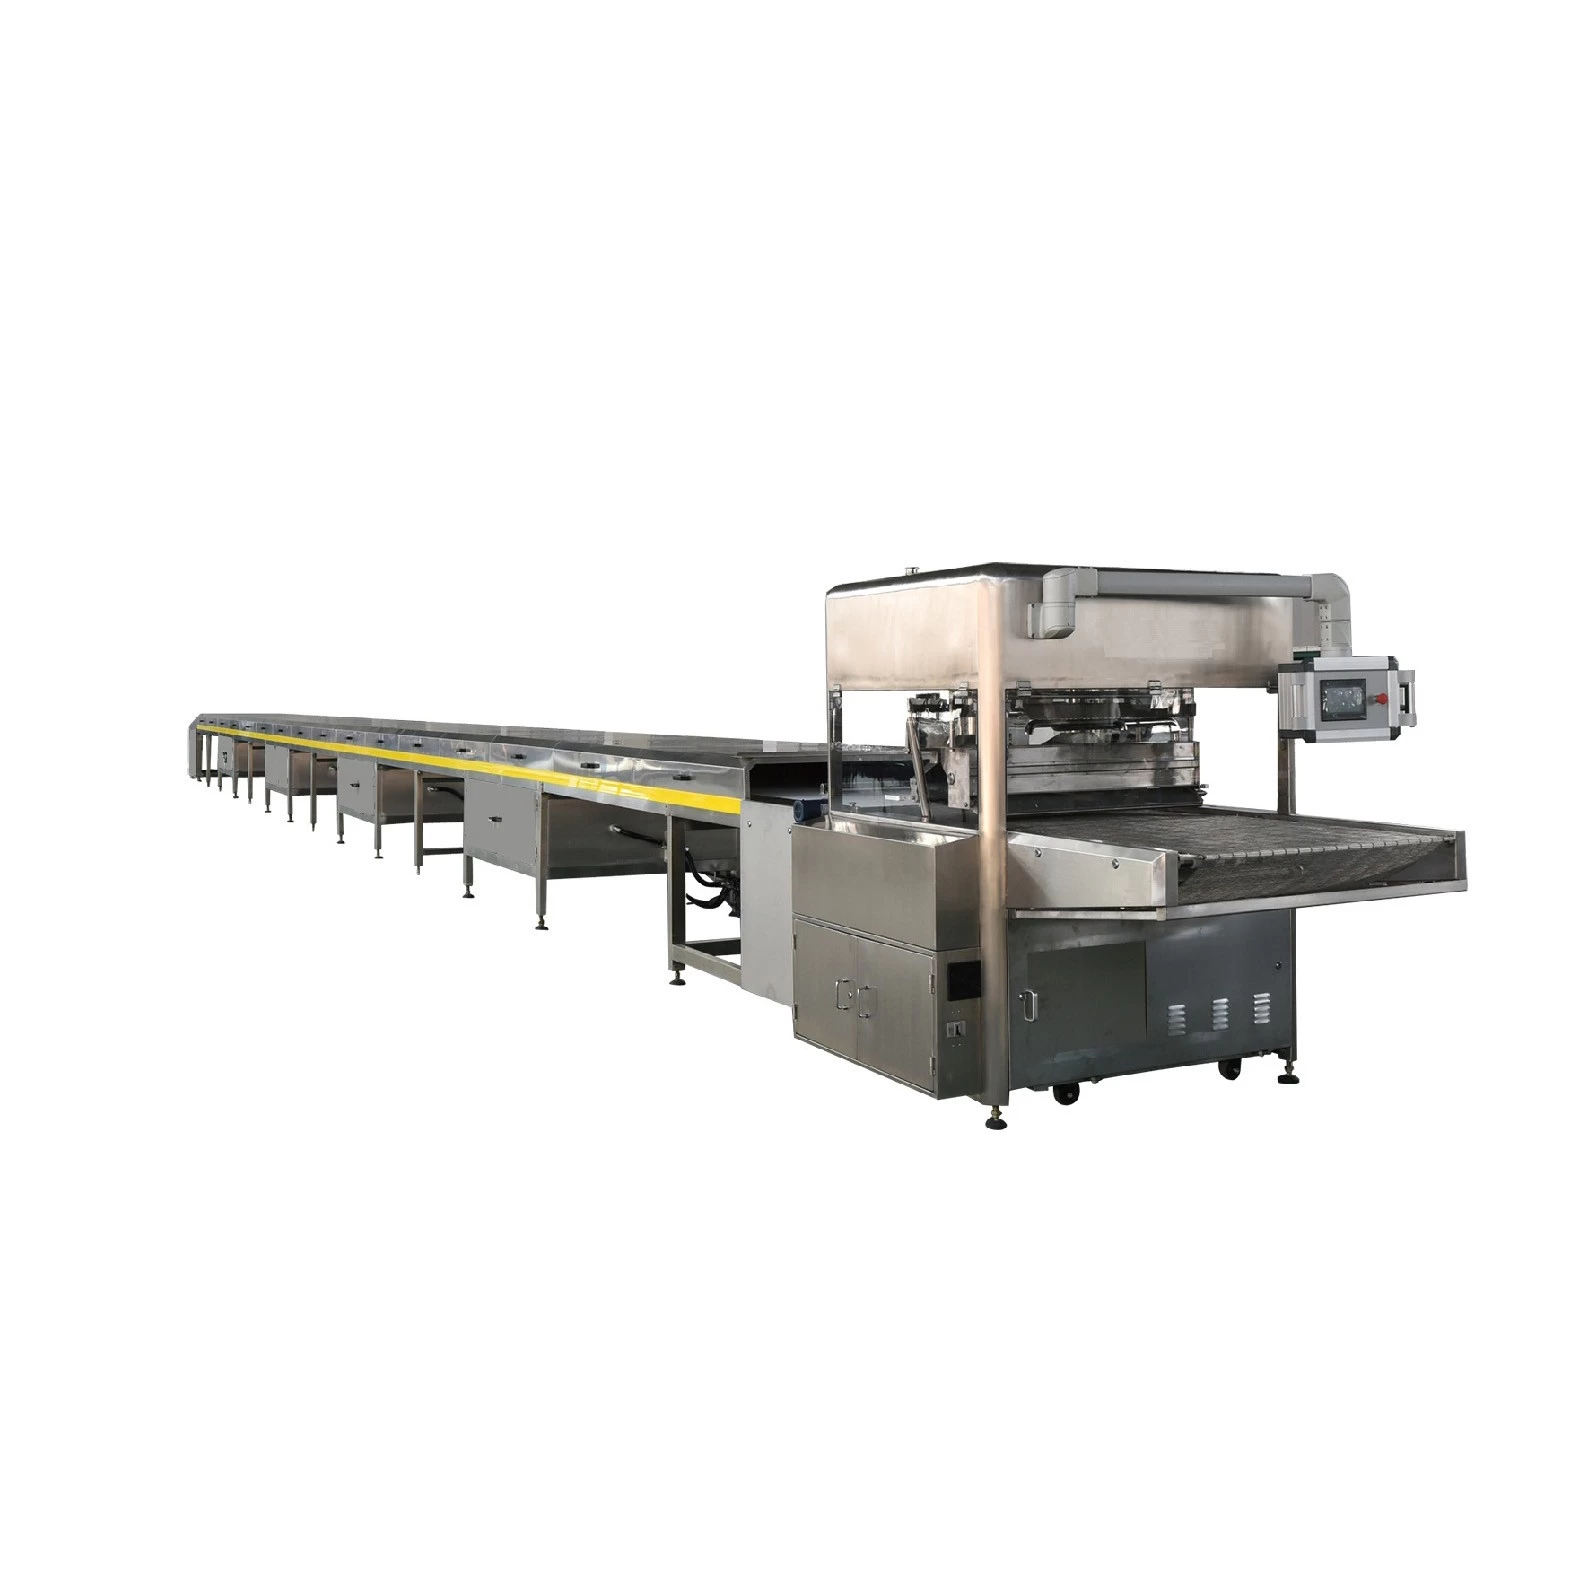 China CE Certificate Food Processing Equipment Chocolate Enrobing Machine fabrikant